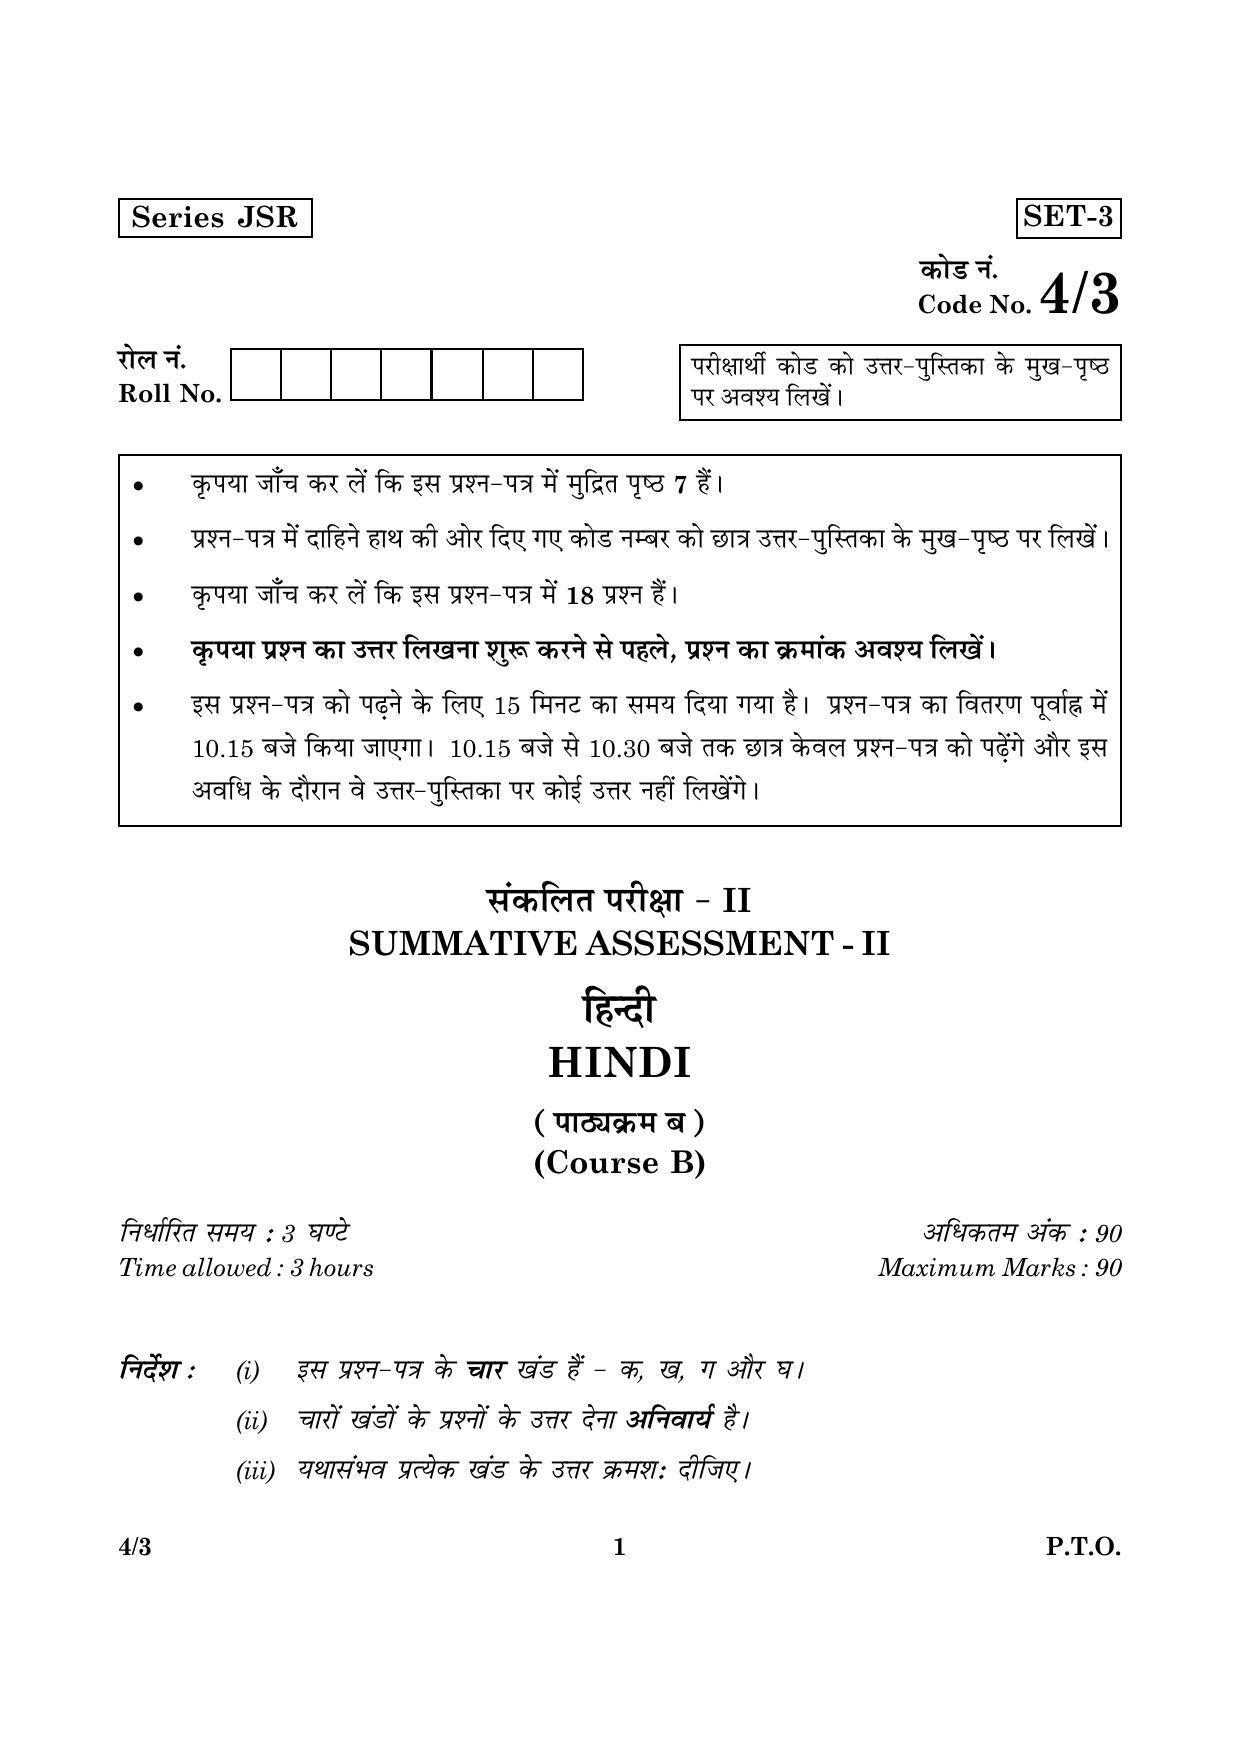 CBSE Class 10 004 Set 3 Hindi Course B 2016 Question Paper - Page 1